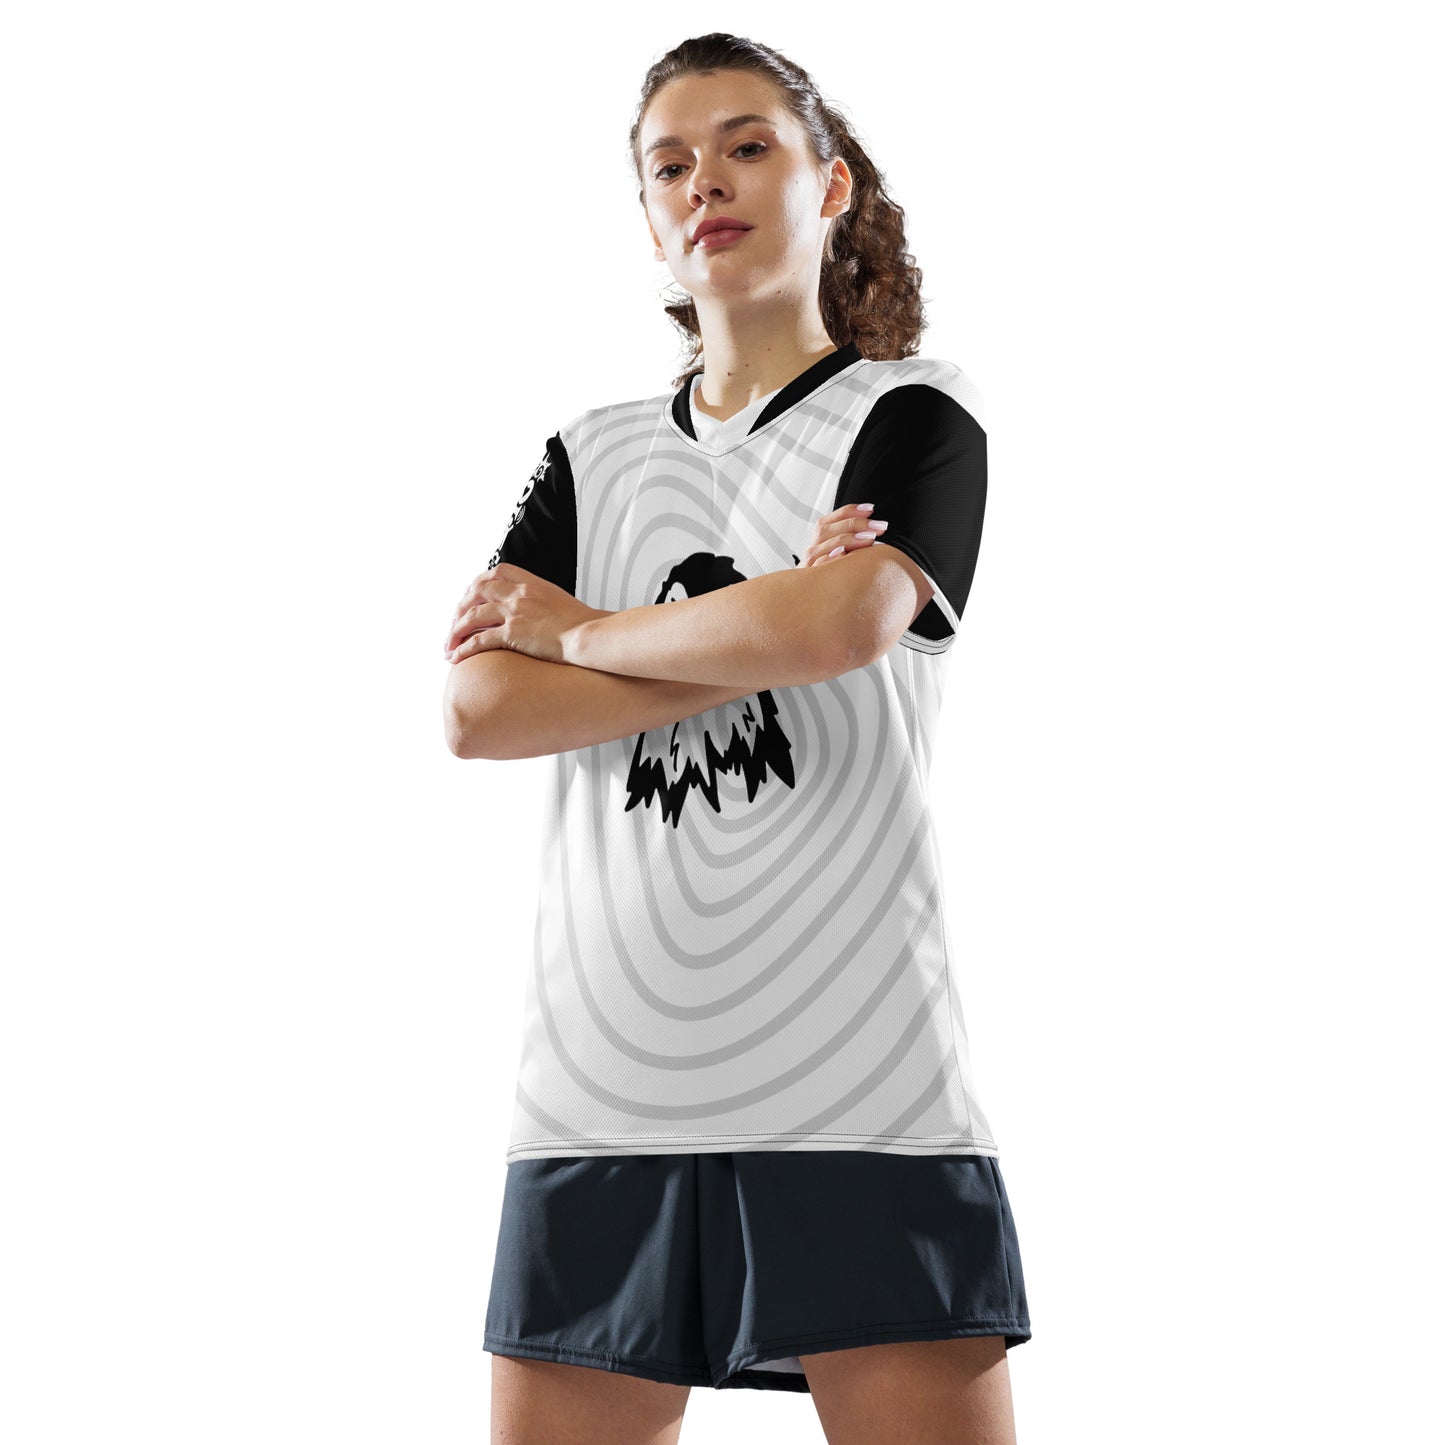 Recycled unisex sports jersey ActSun 9